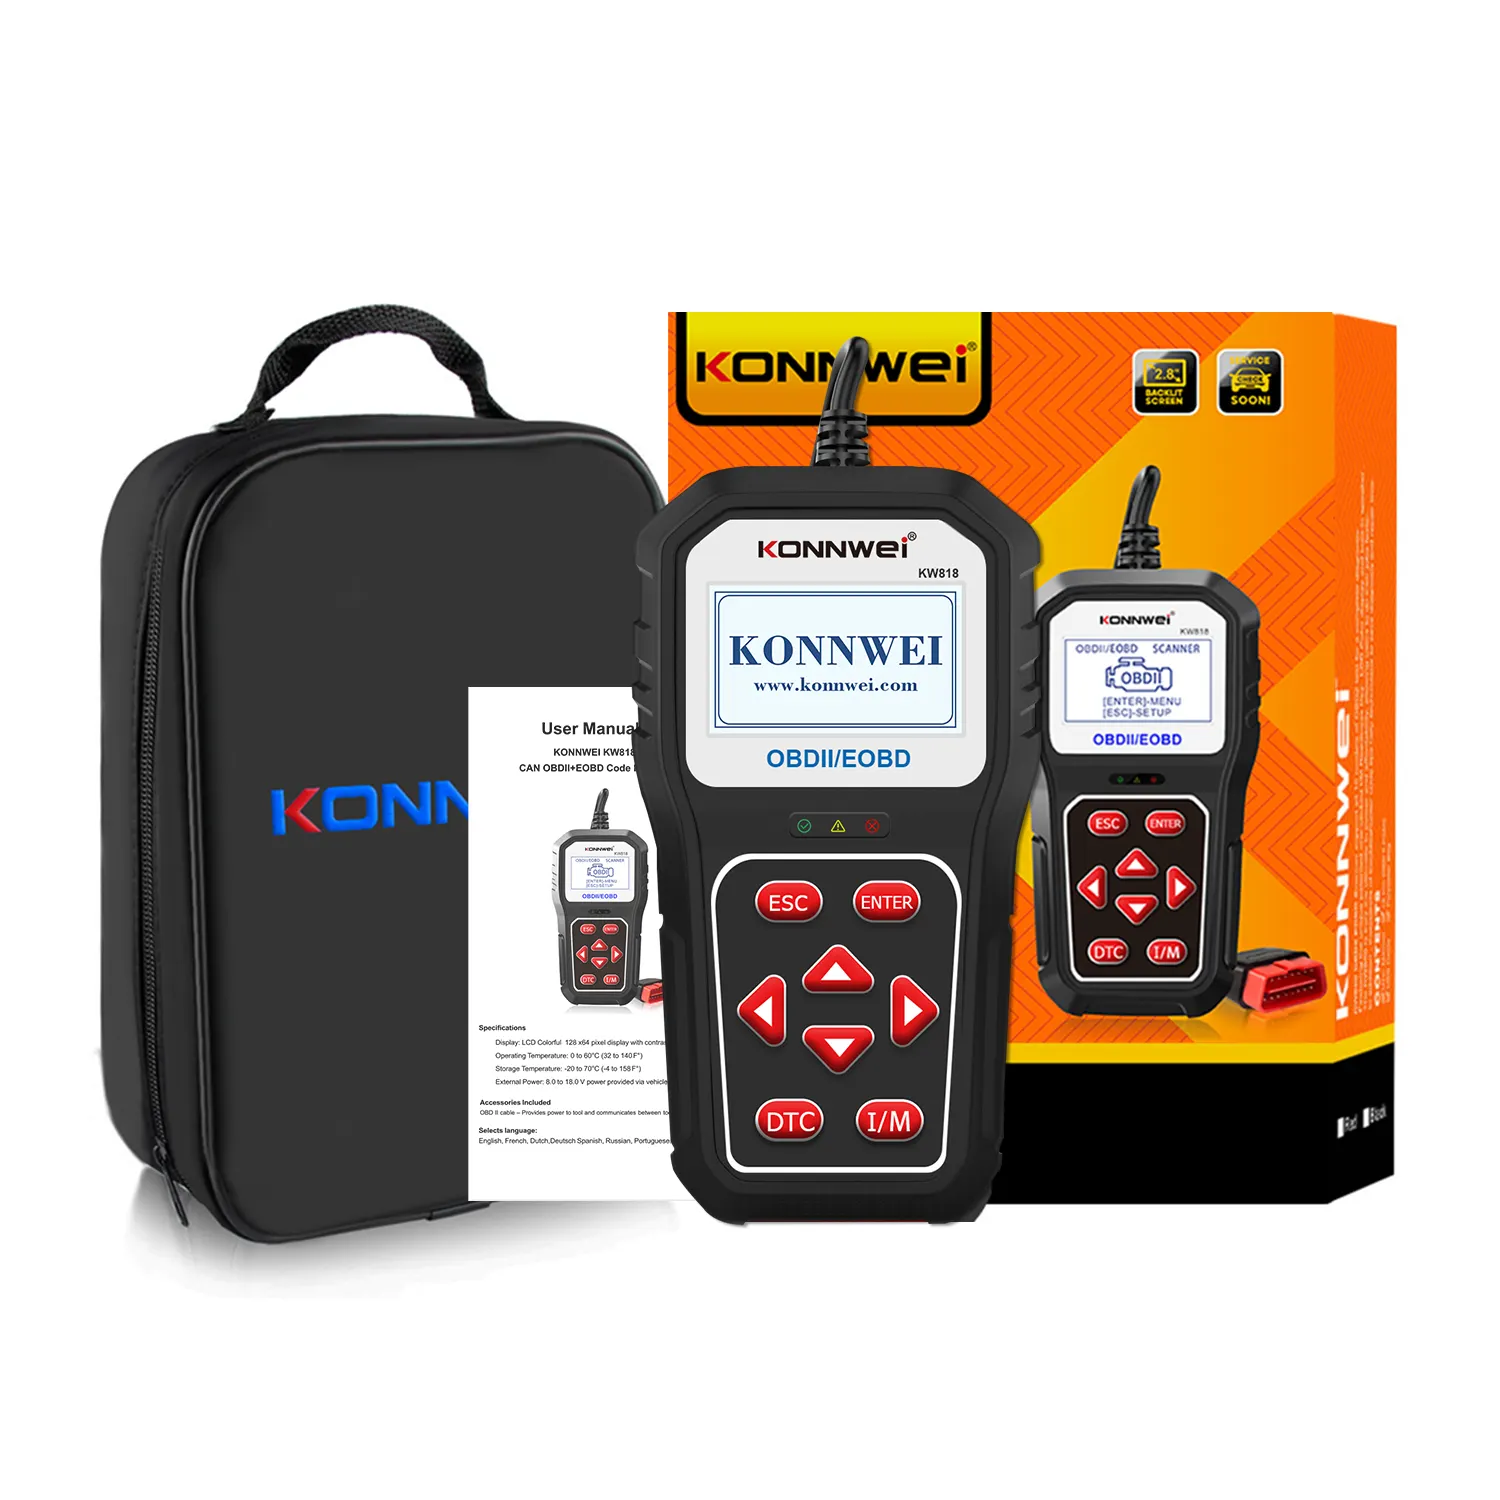 KW818 OBD2 EOBD Car Diagnosis Scanner Tool with Bluetooth Data Transfer function